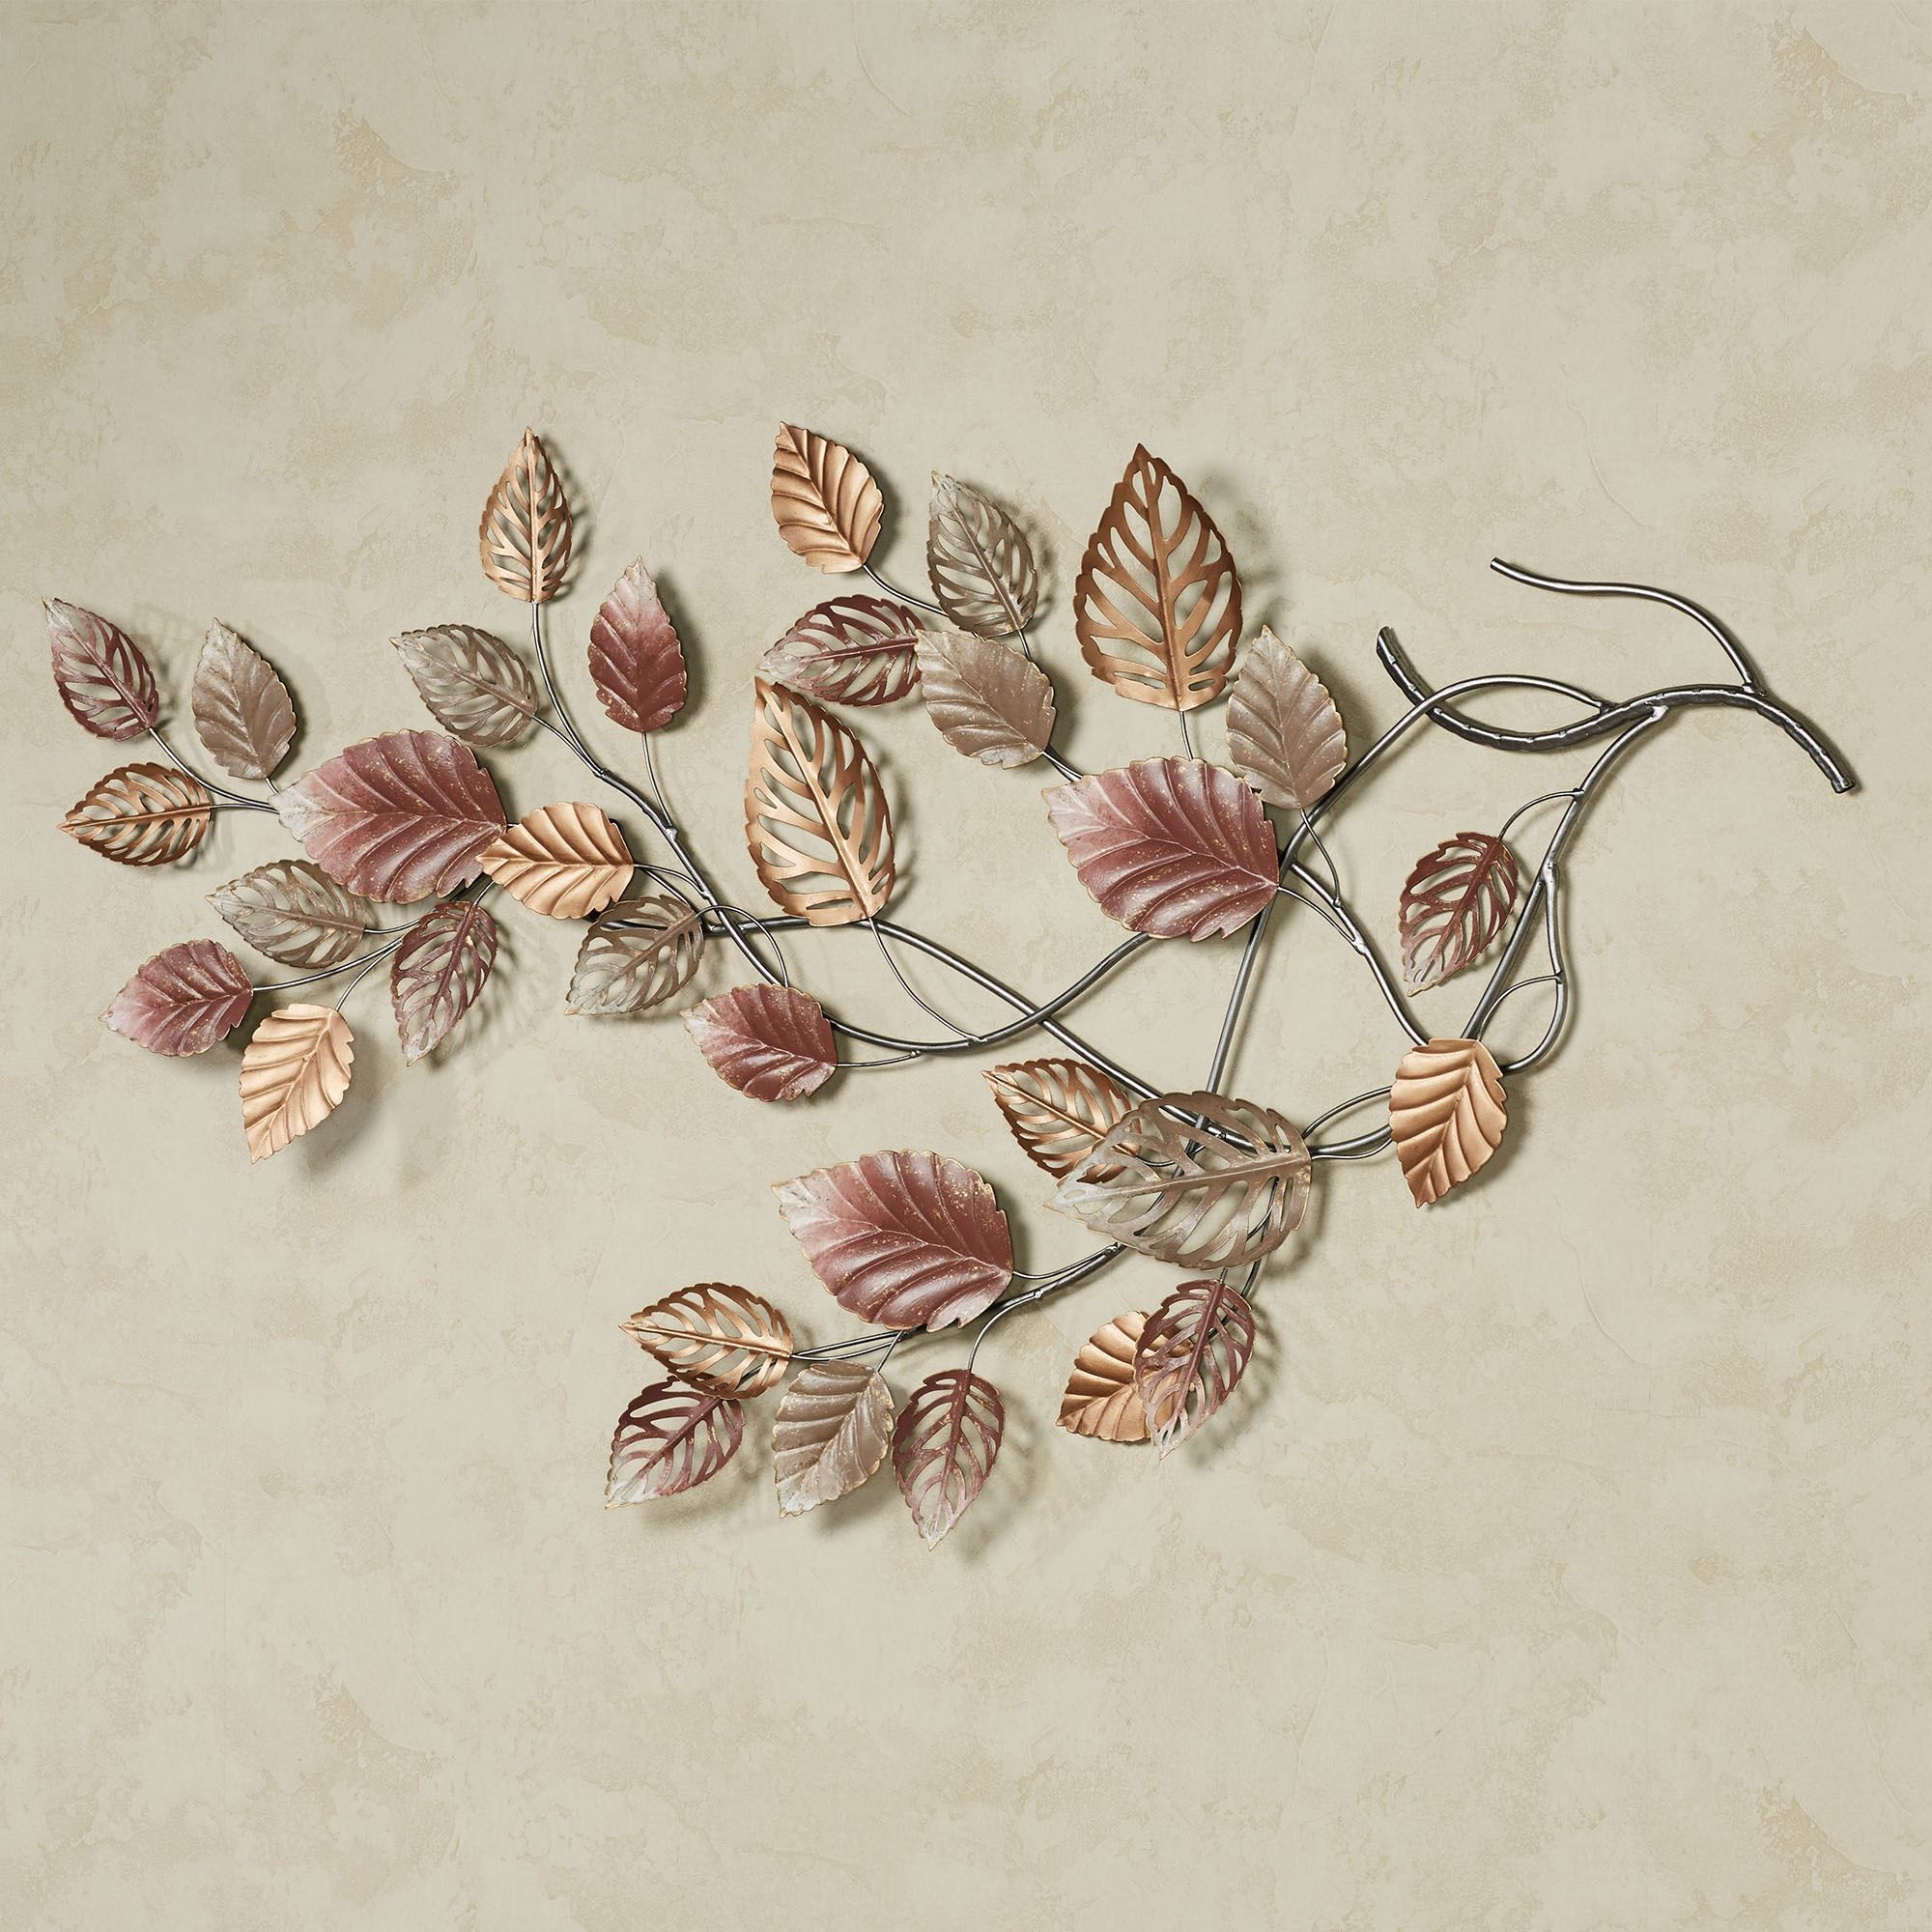 Swaying Leaves Metal Wall Art Intended For Leaf Metal Wall Art (View 4 of 15)